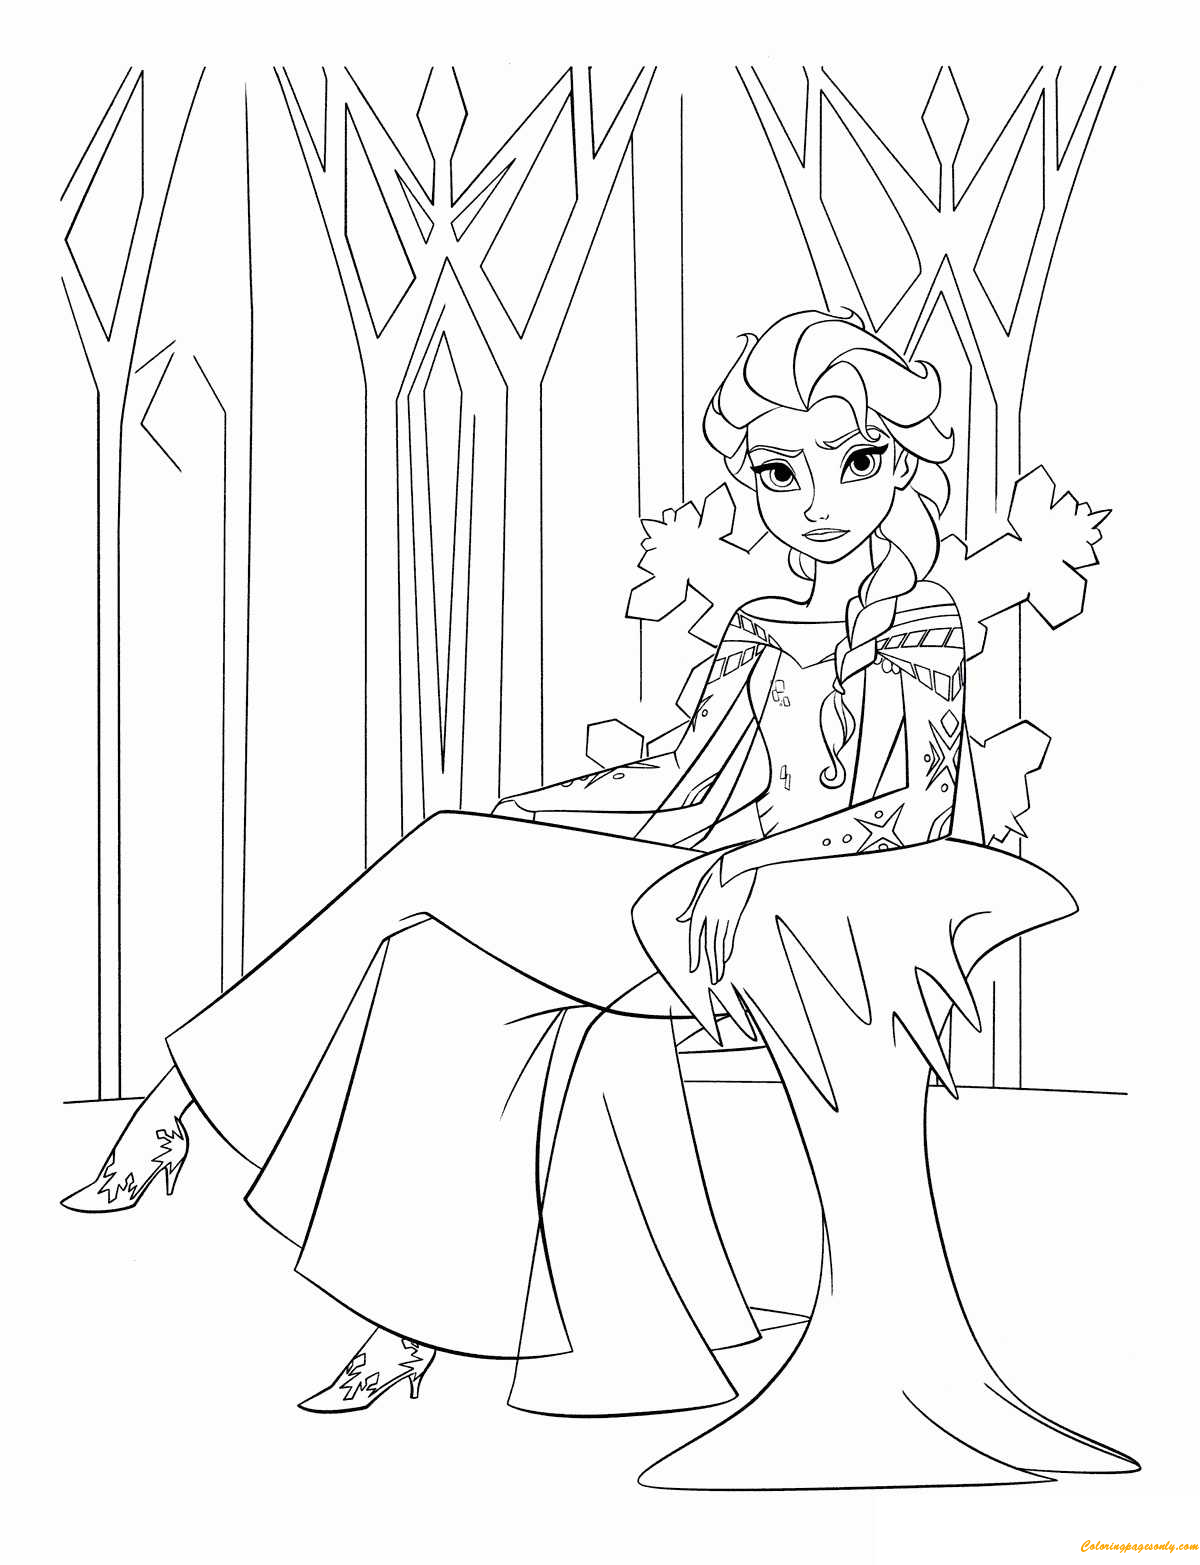 Queen Elsa Of Arendelle Coloring Page